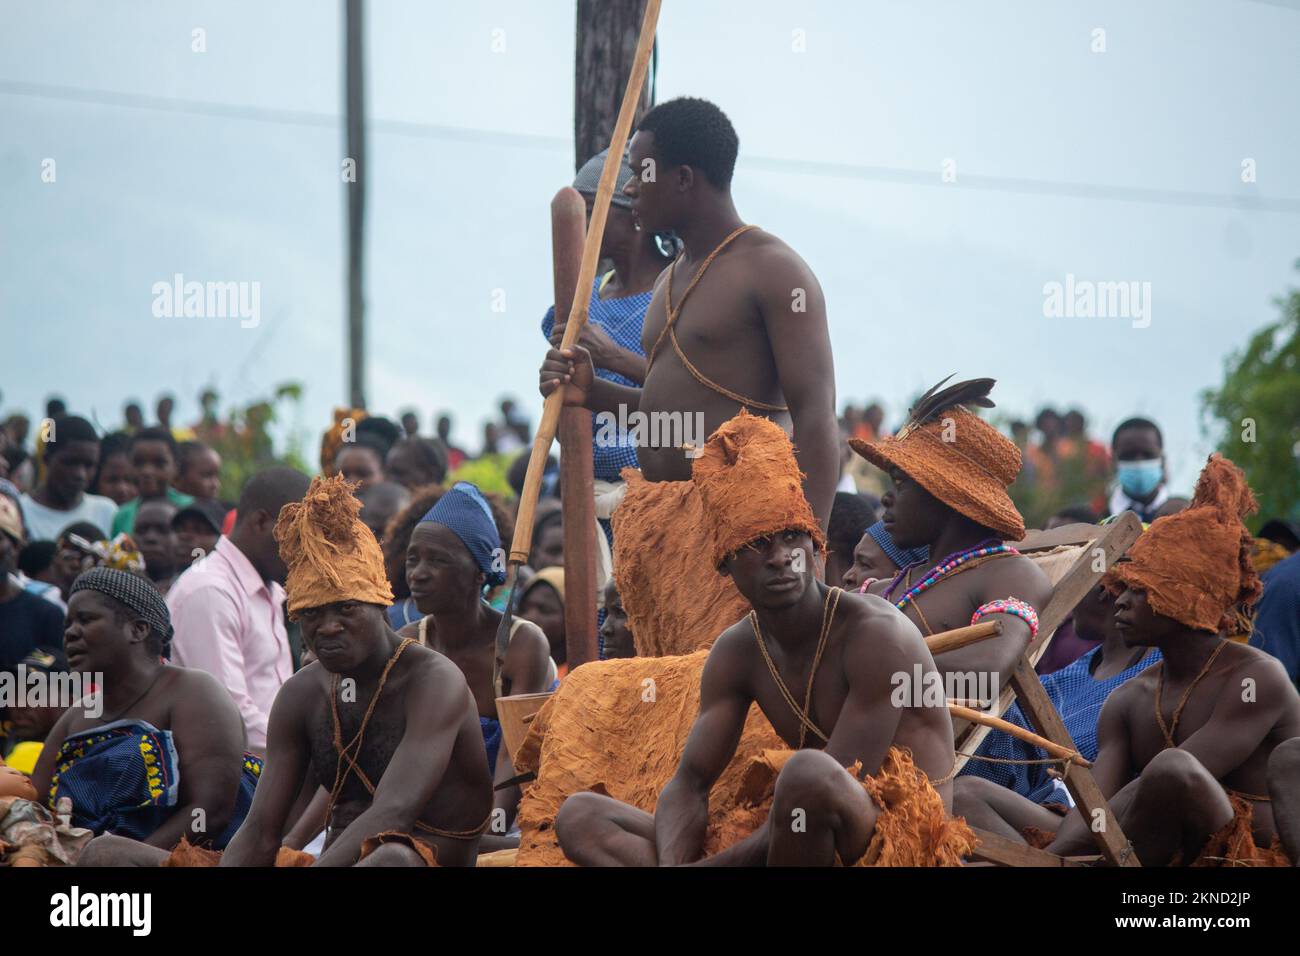 Men demonstrate how servants carried the litter containing their African king, wearing traditional animal skin clothing Stock Photo